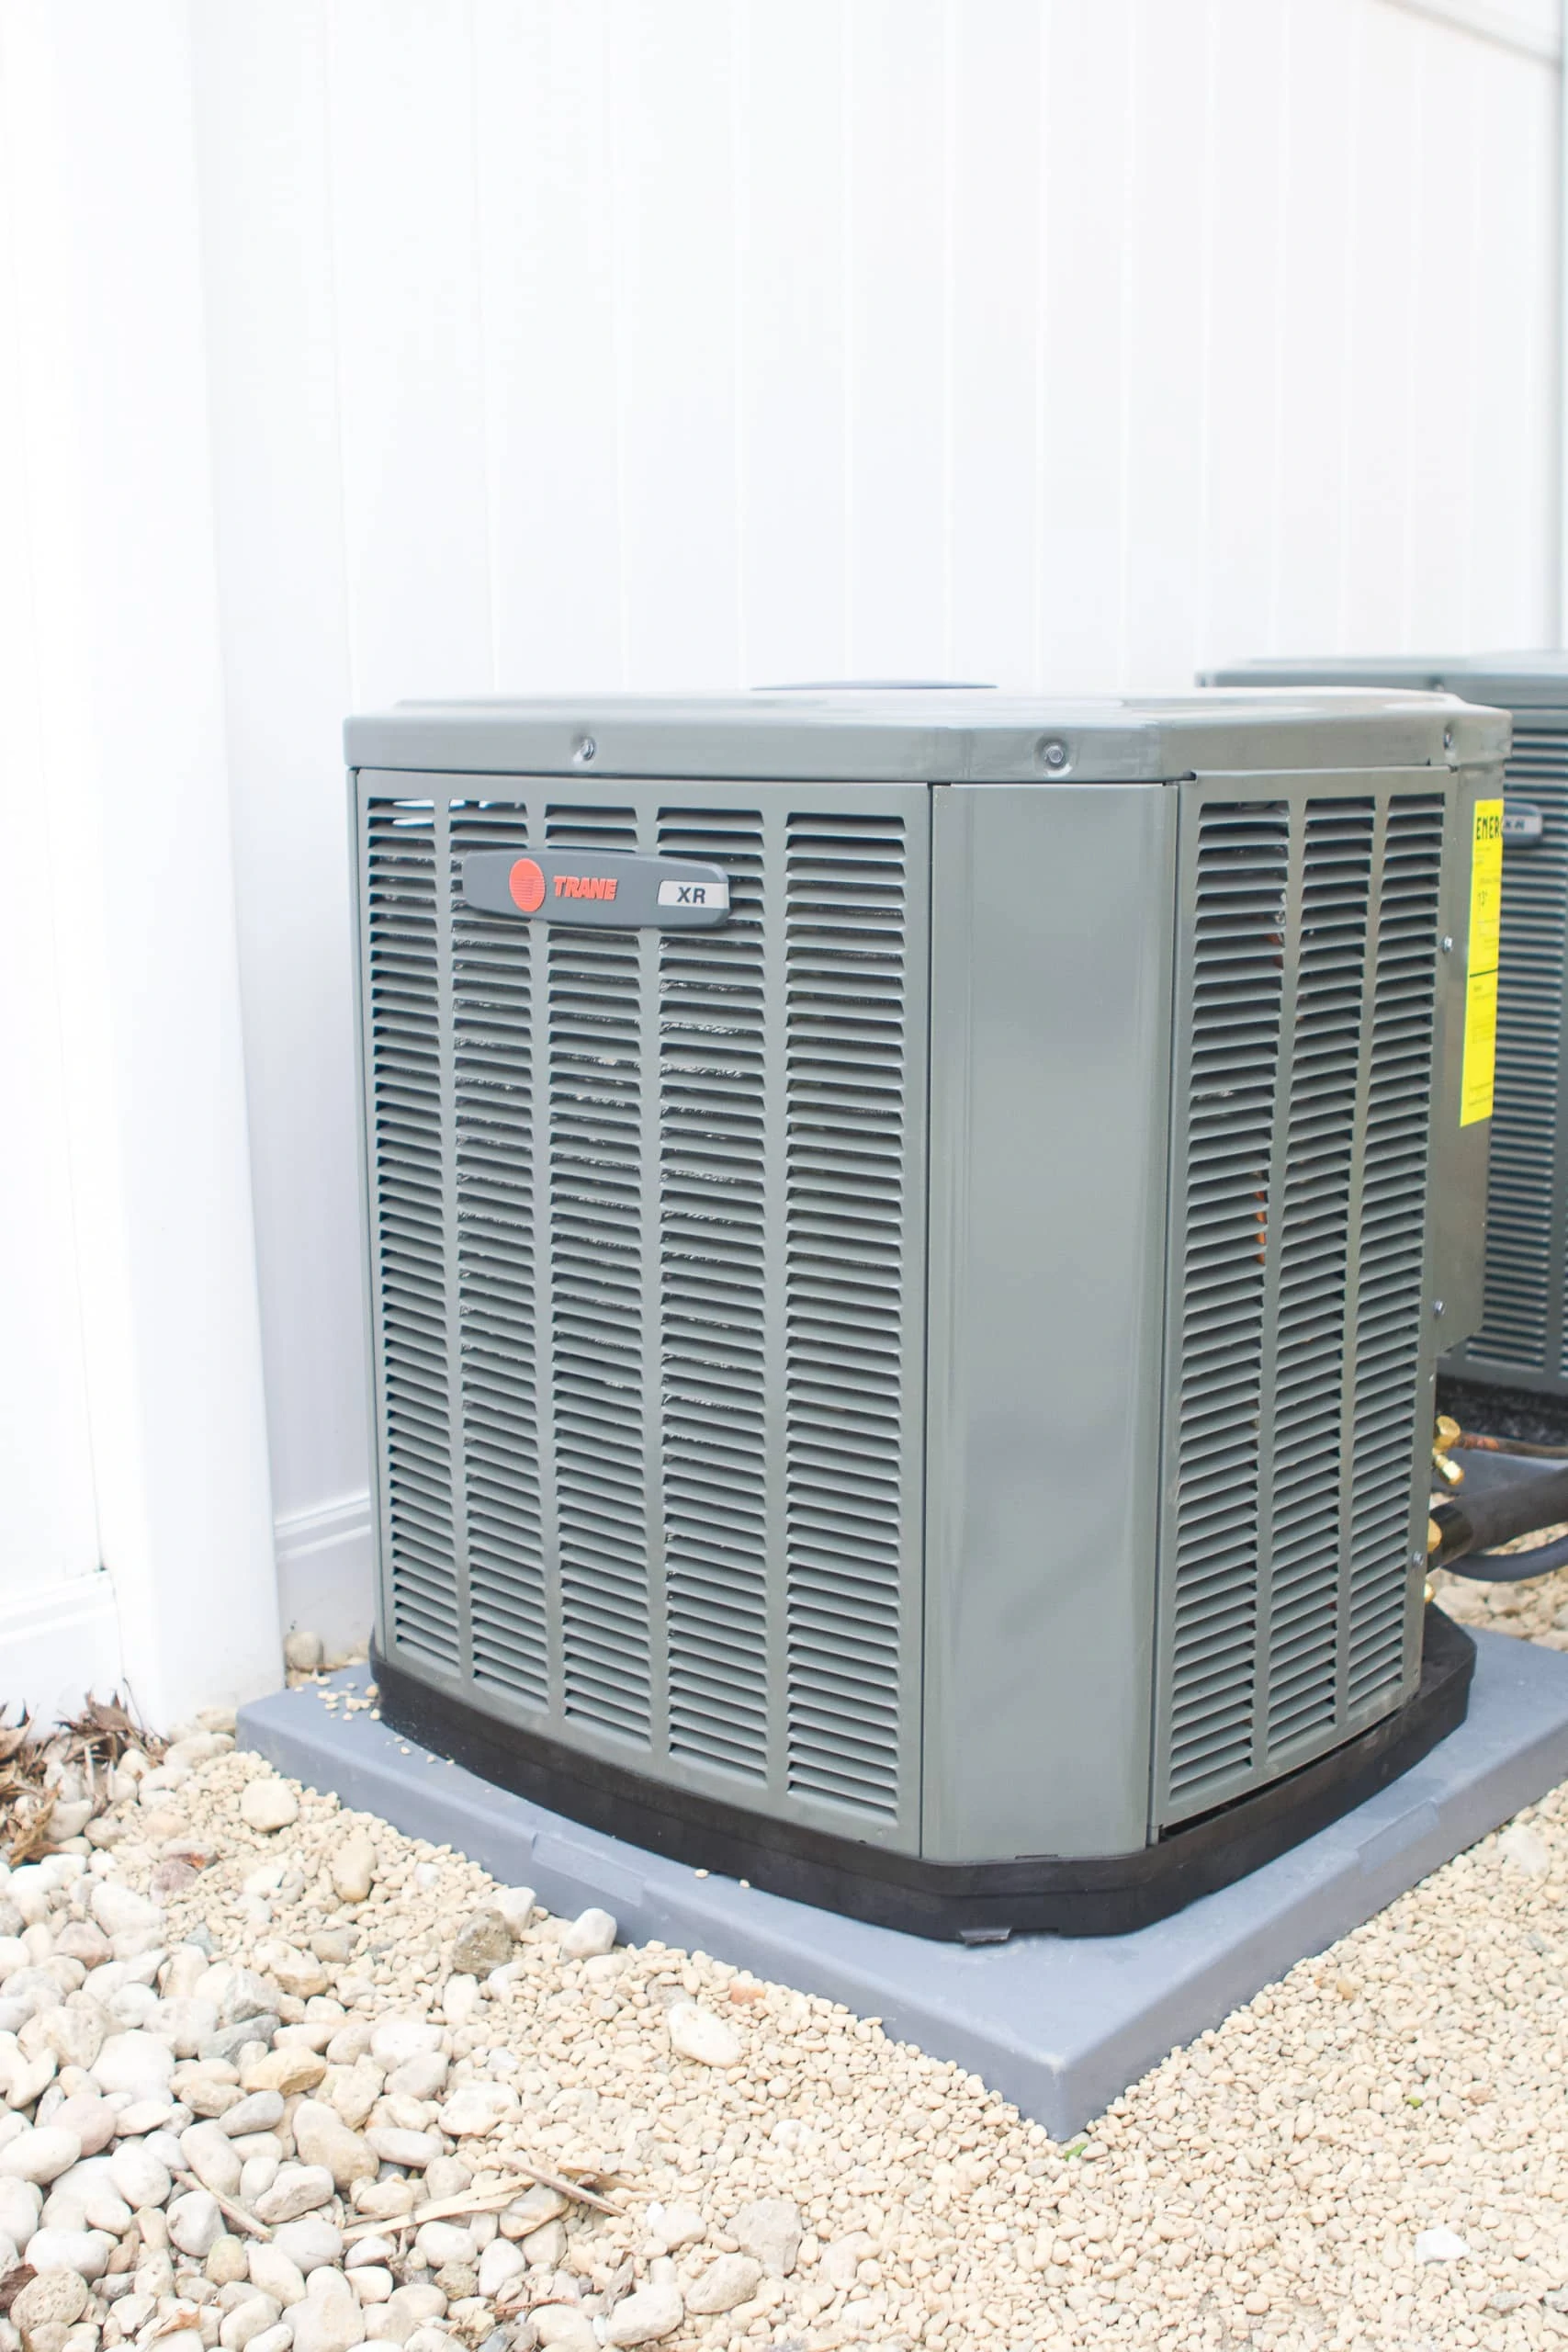 Our new air conditioners from Trane